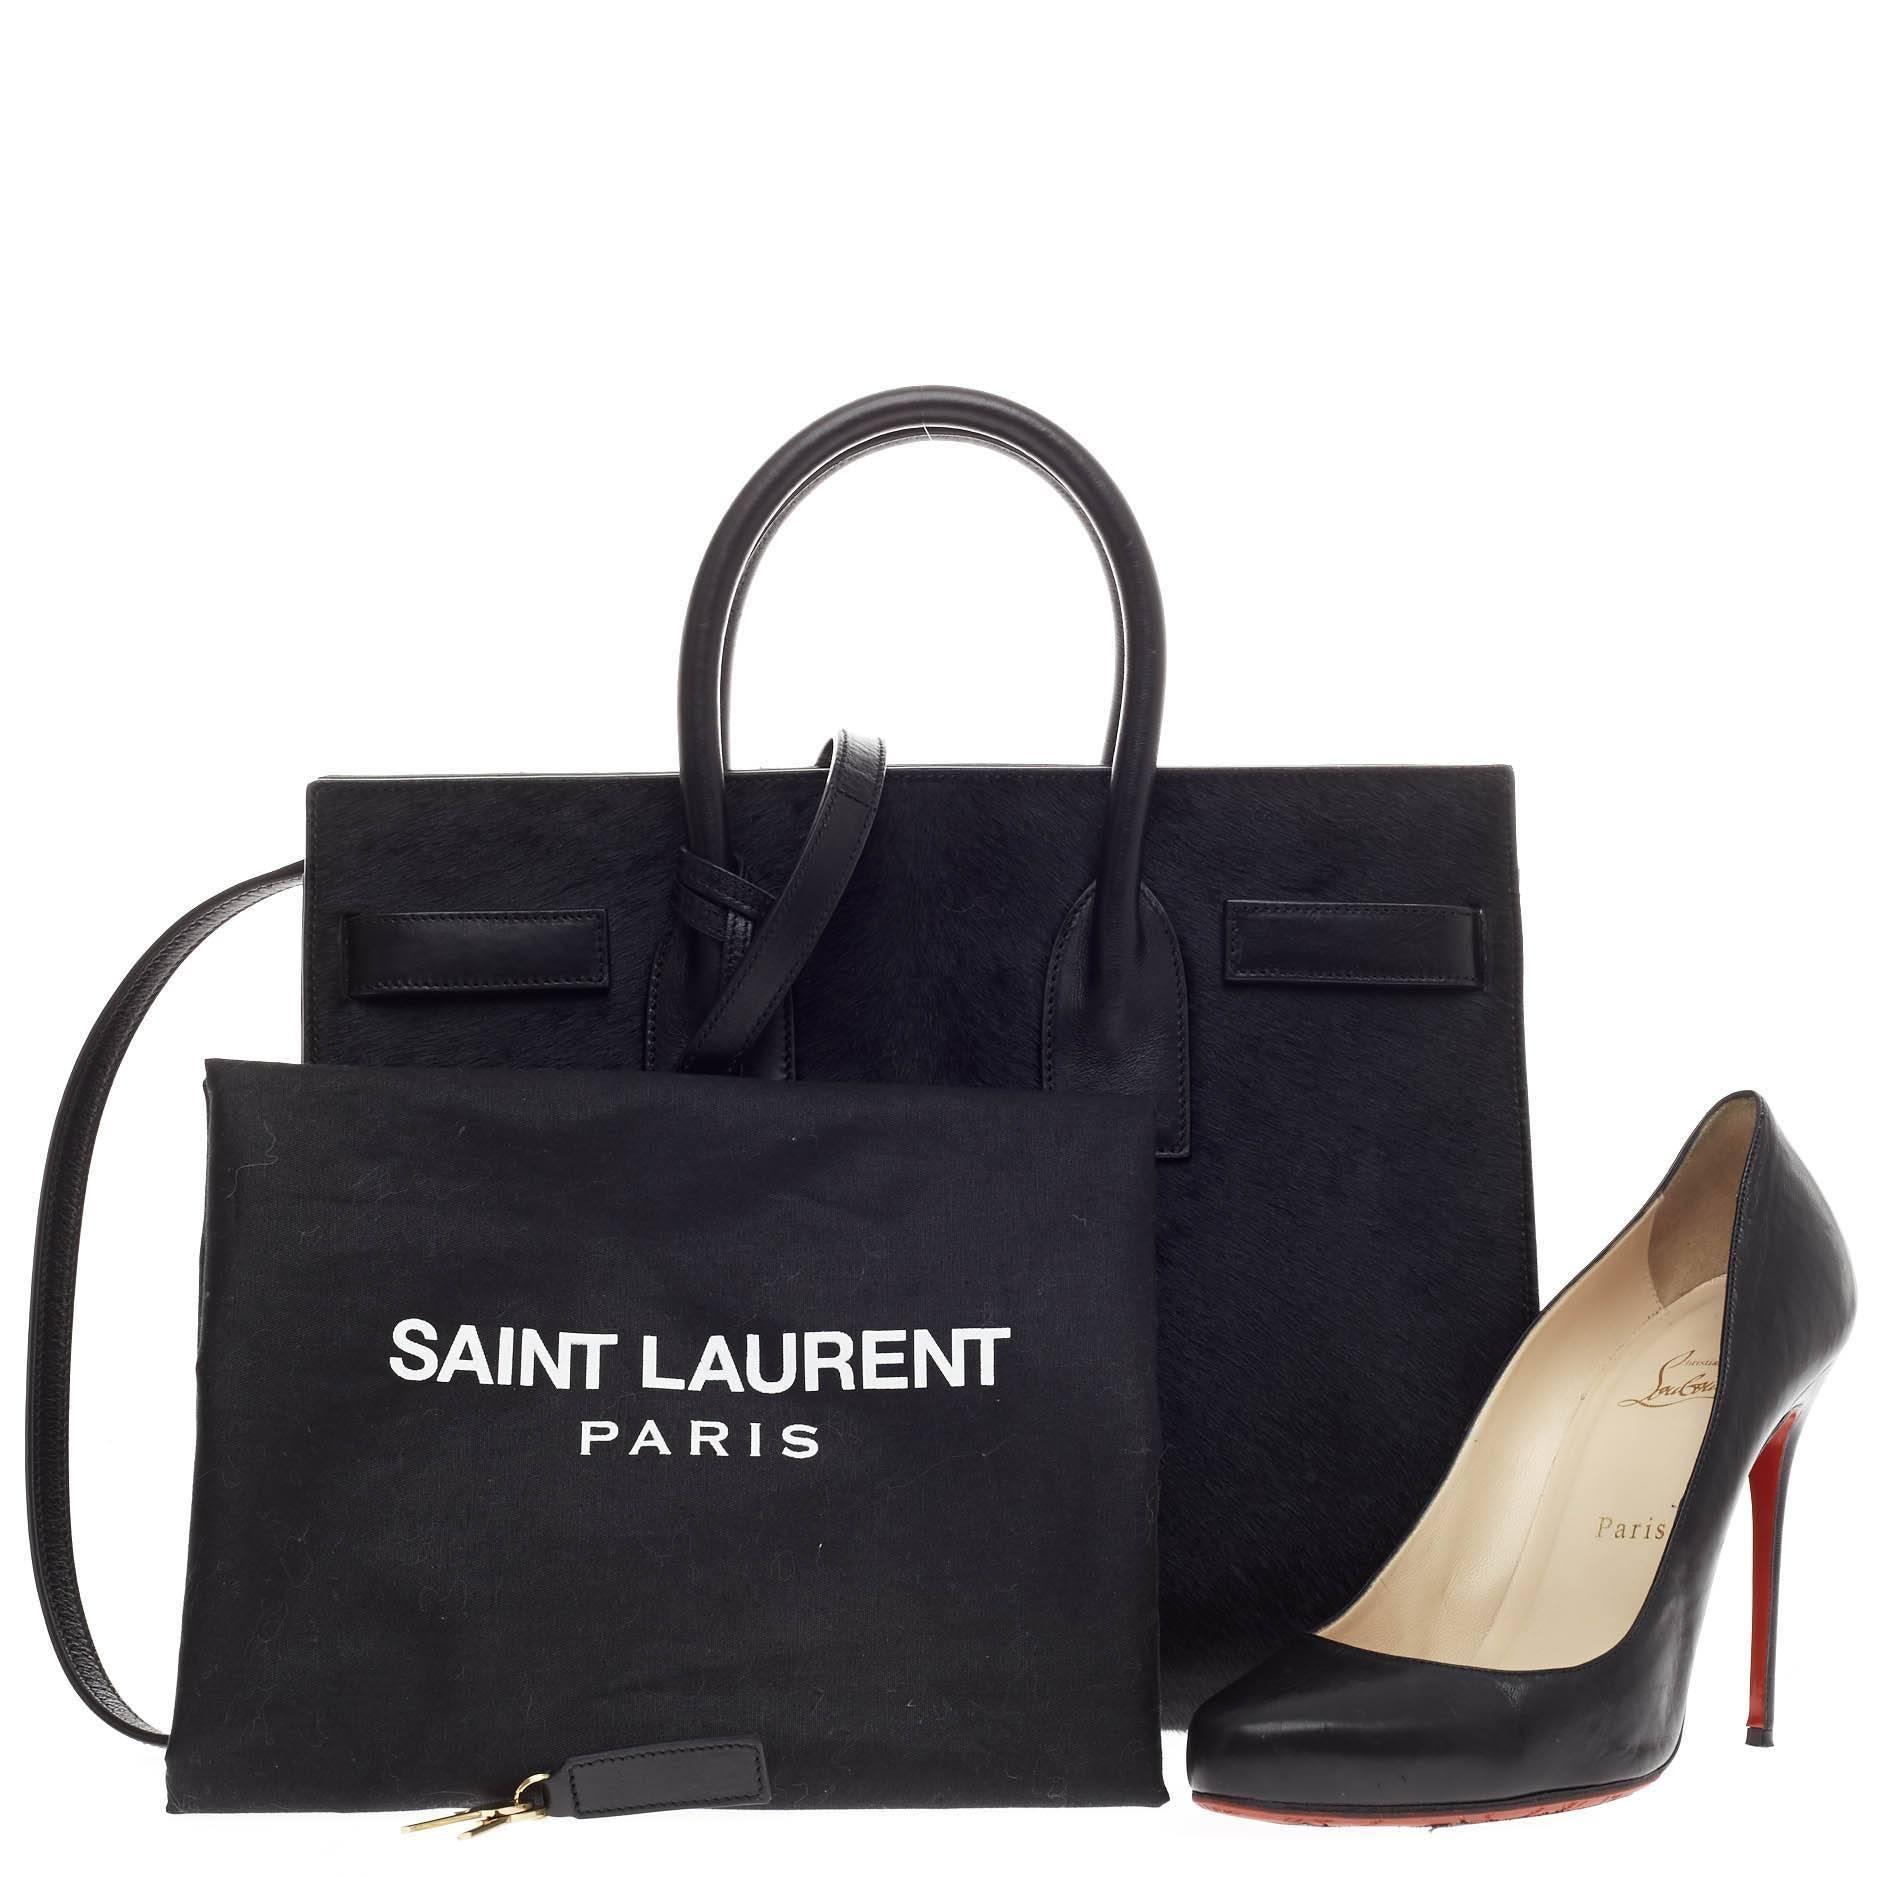 This authentic Saint Laurent Sac De Jour Pony Hair Small  is a sleek yet elegant bag synonymous with the brand's classic aesthetic. Crafted from sleek black pony hair and leather, this sought-out tote features dual-rolled leather handles, leather